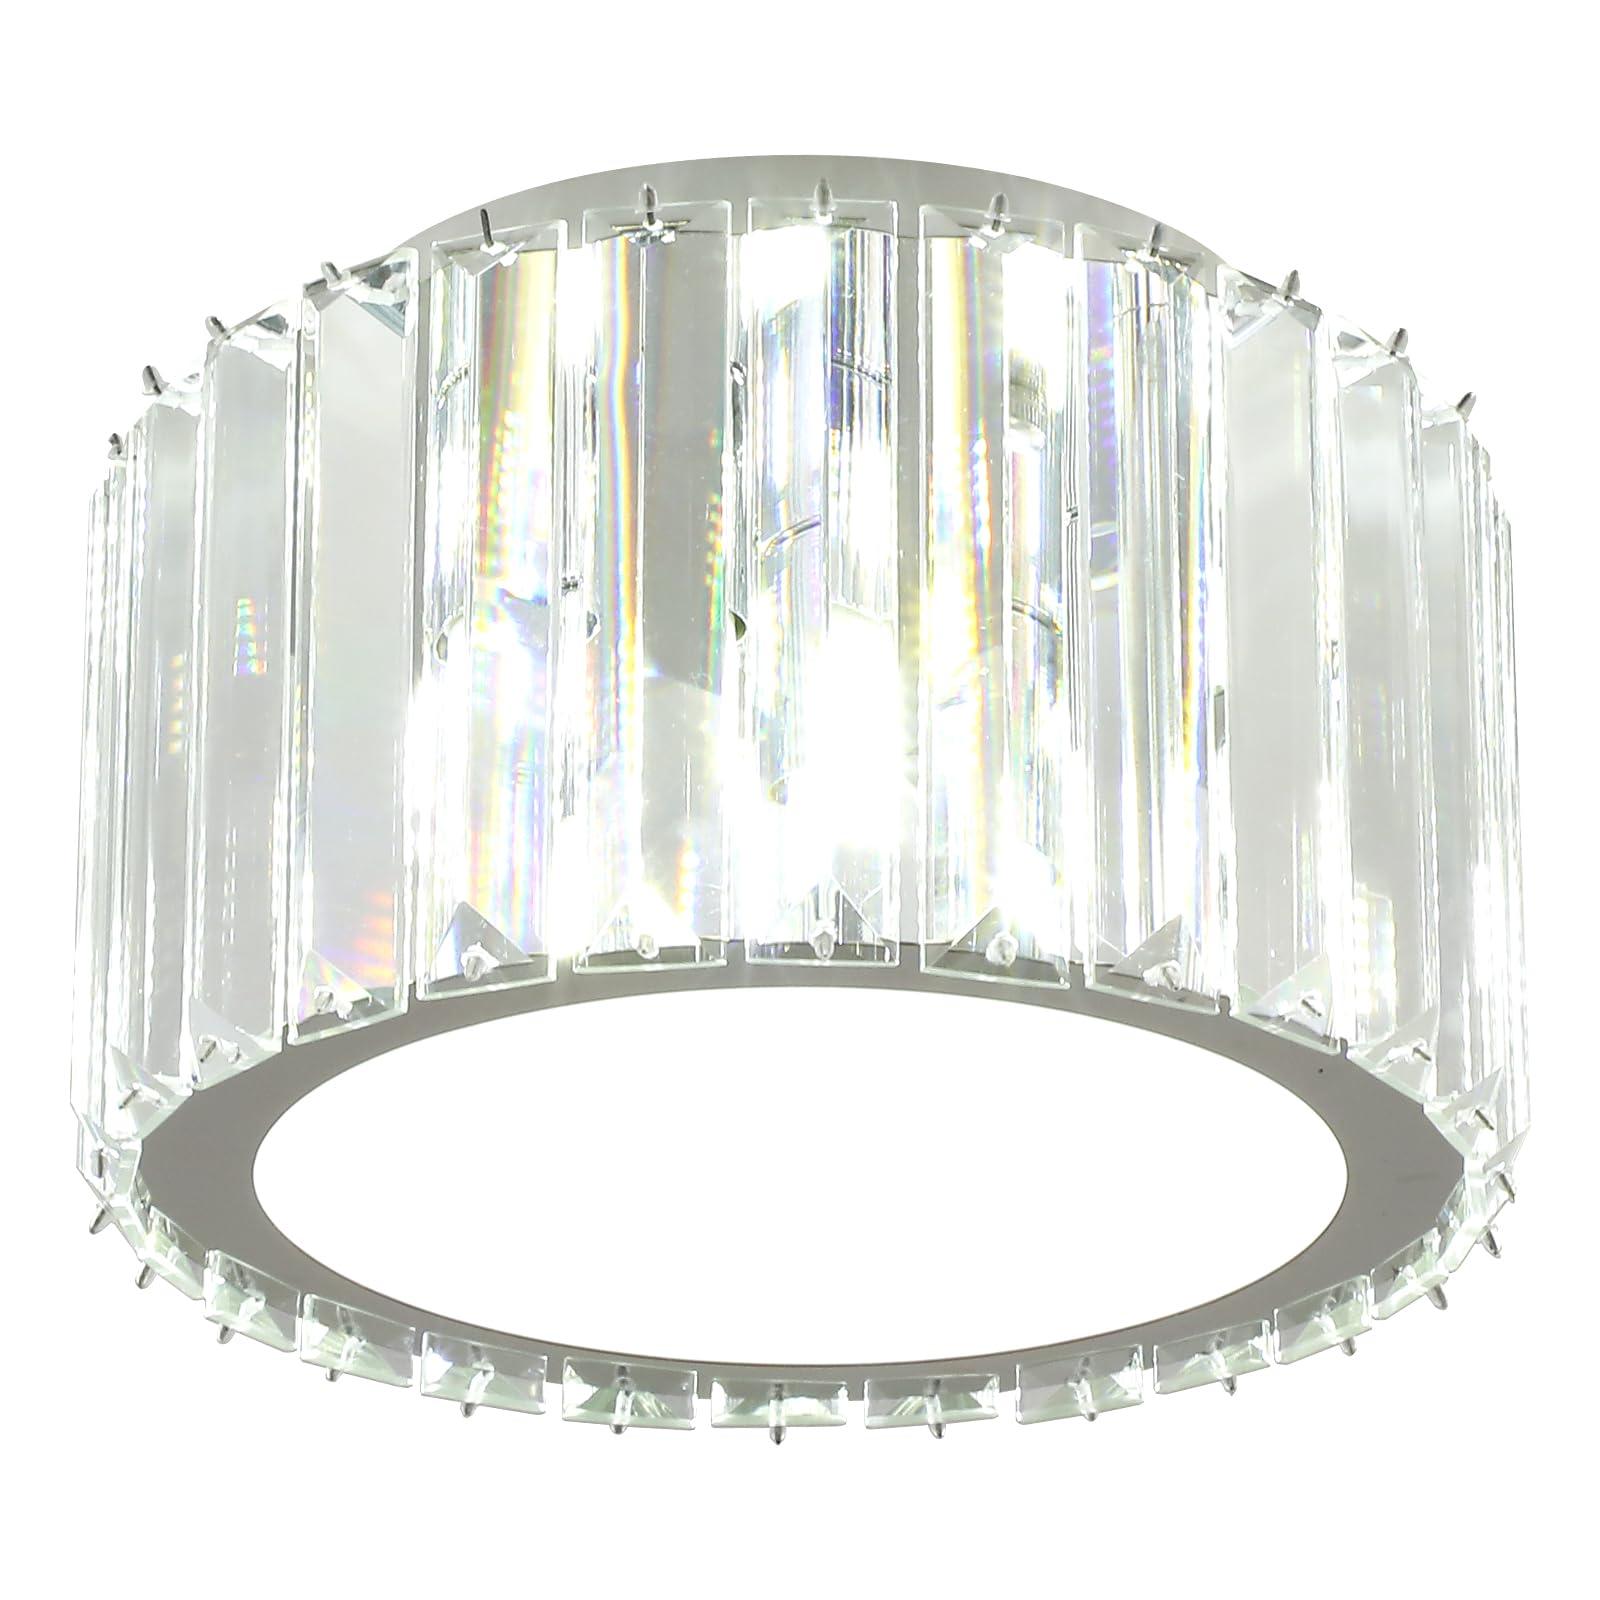 FORCOSO Crystal Light Shade Ceiling Chrome Ø22cm Round 3 Lights 0